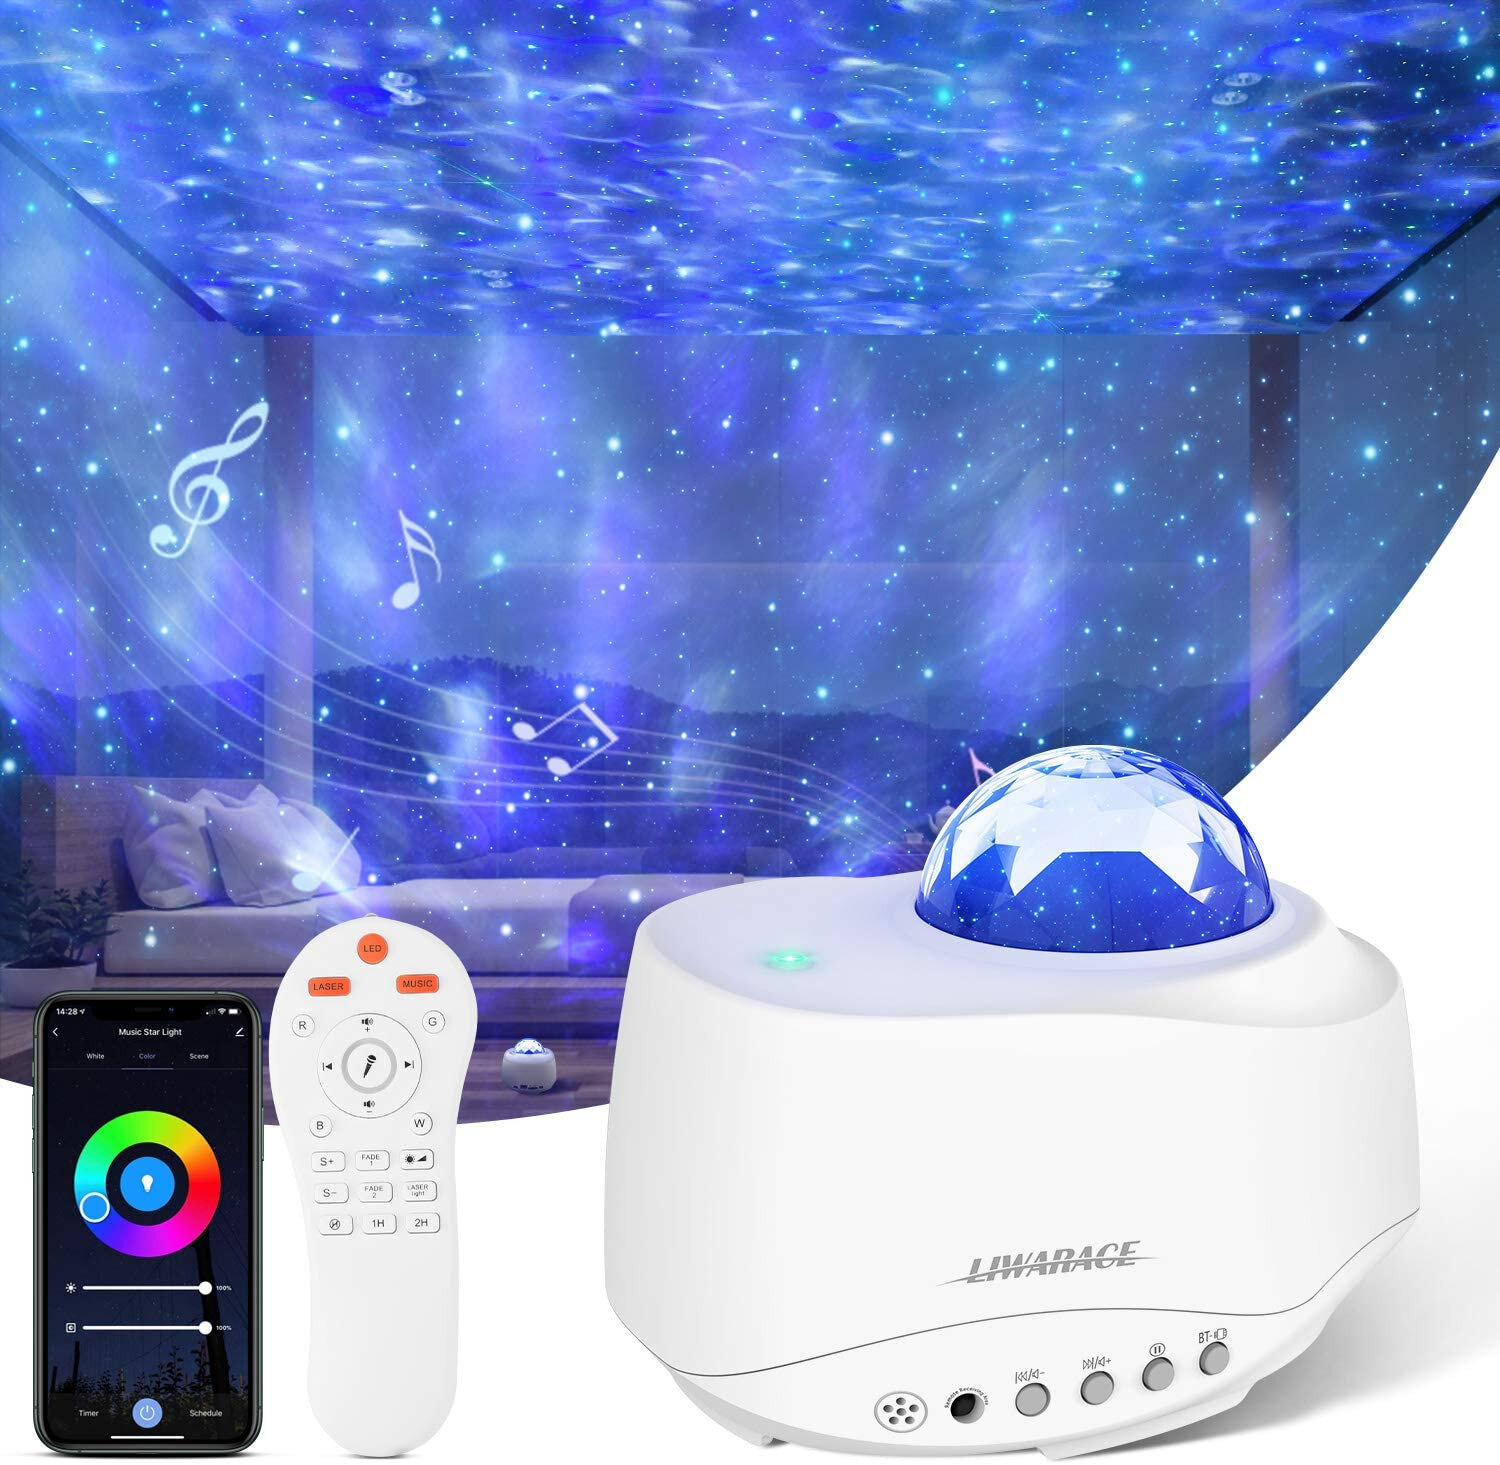 Star Projector 10 Planets Pattern Night Light Projector with Remote Control Music Player and Timer Ocean Wave LED Light Projector for Kids Room Decor and Party Galaxy Projector Light for Bedroom 